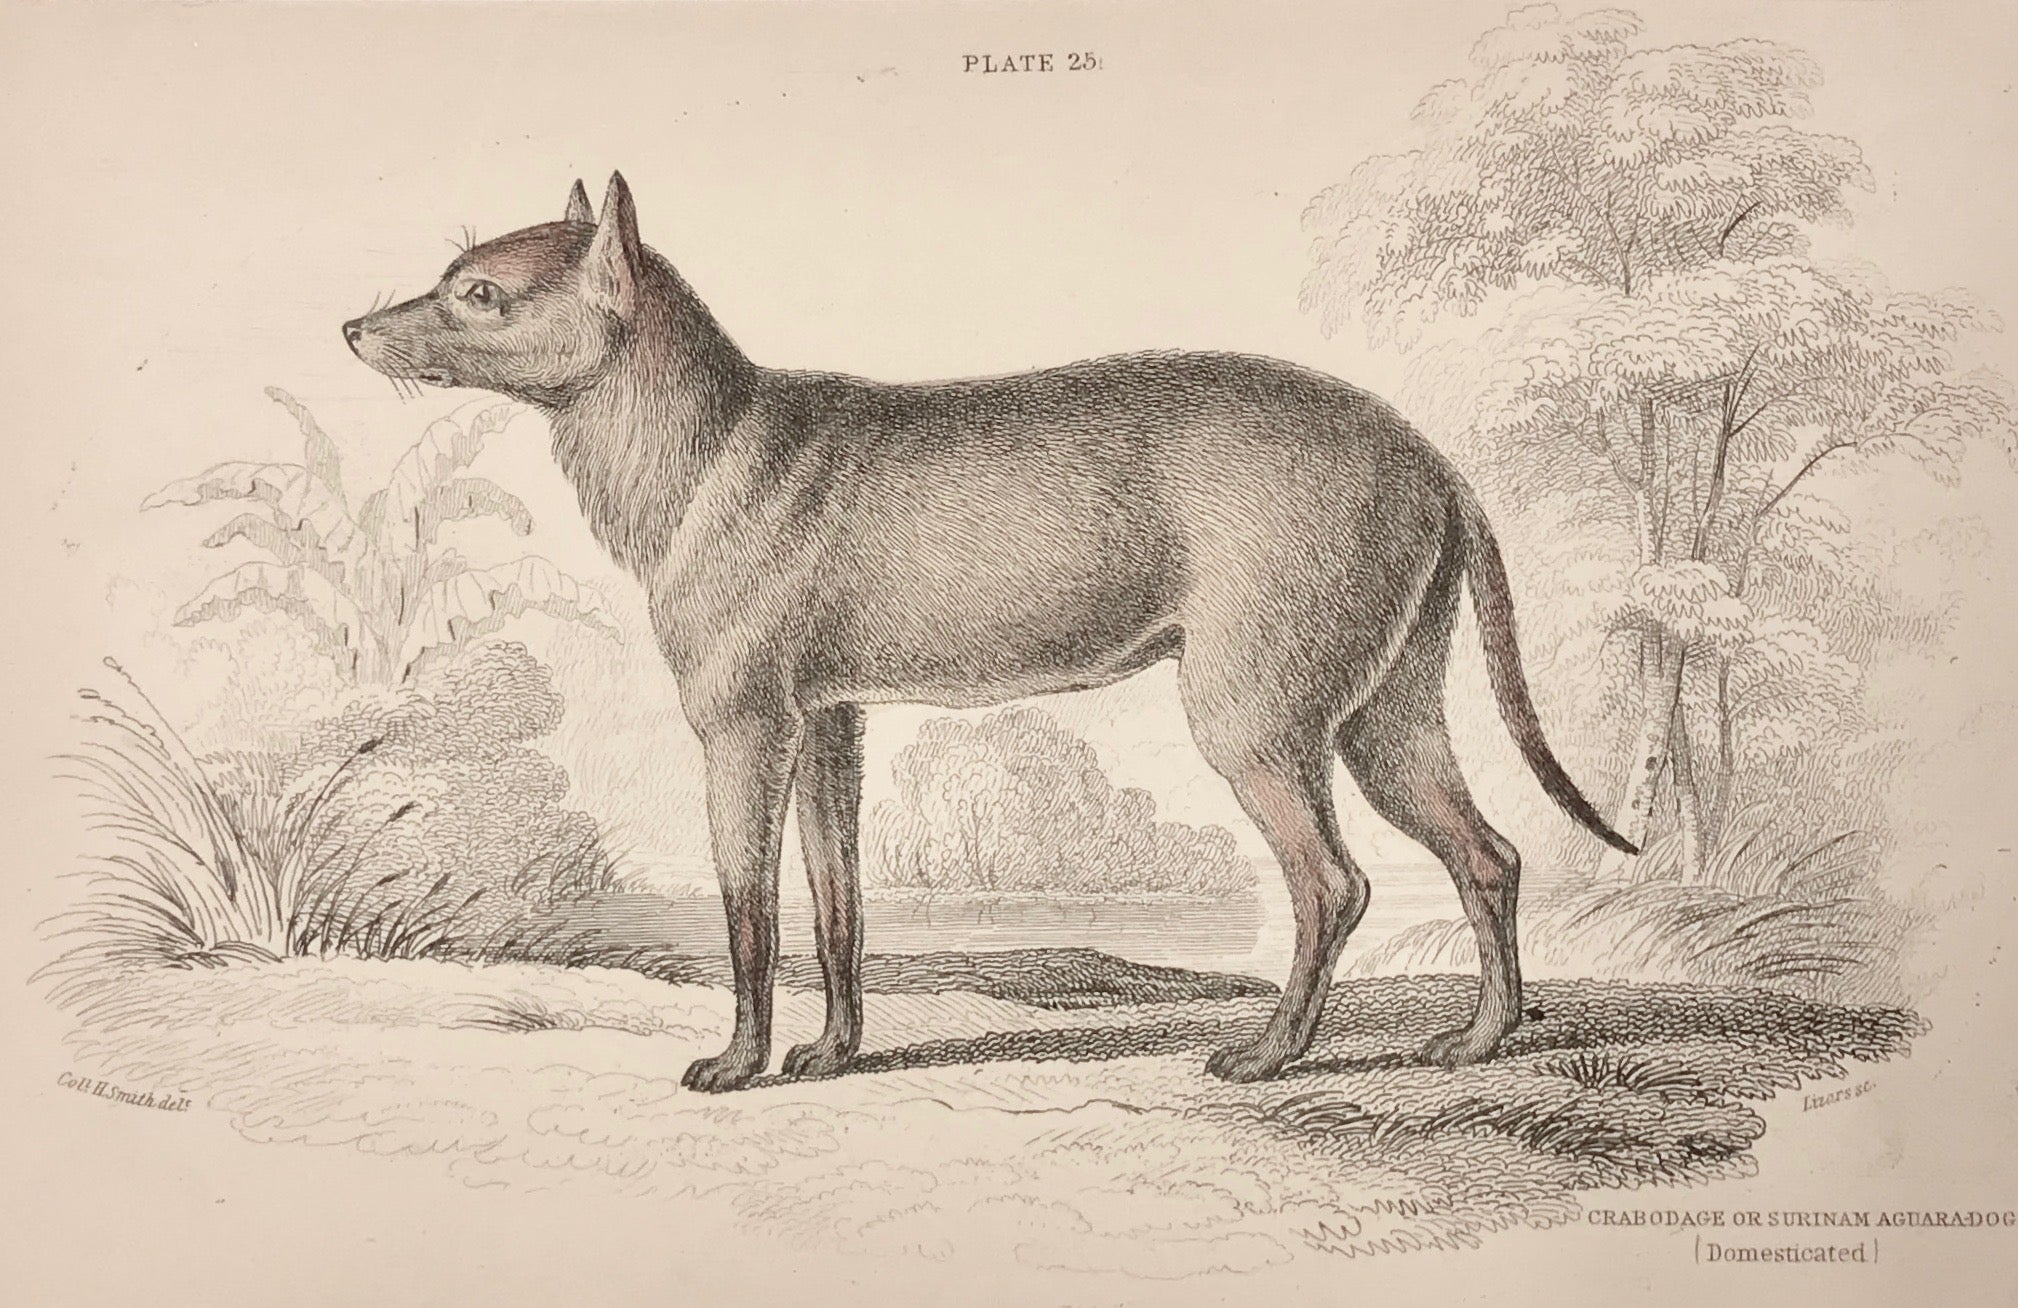 Crabodage of Surinam Aguara dog (Domesticated)  Steel engraving by Lizars in original hand coloring. From "Naturalist's Library", ca 1860.